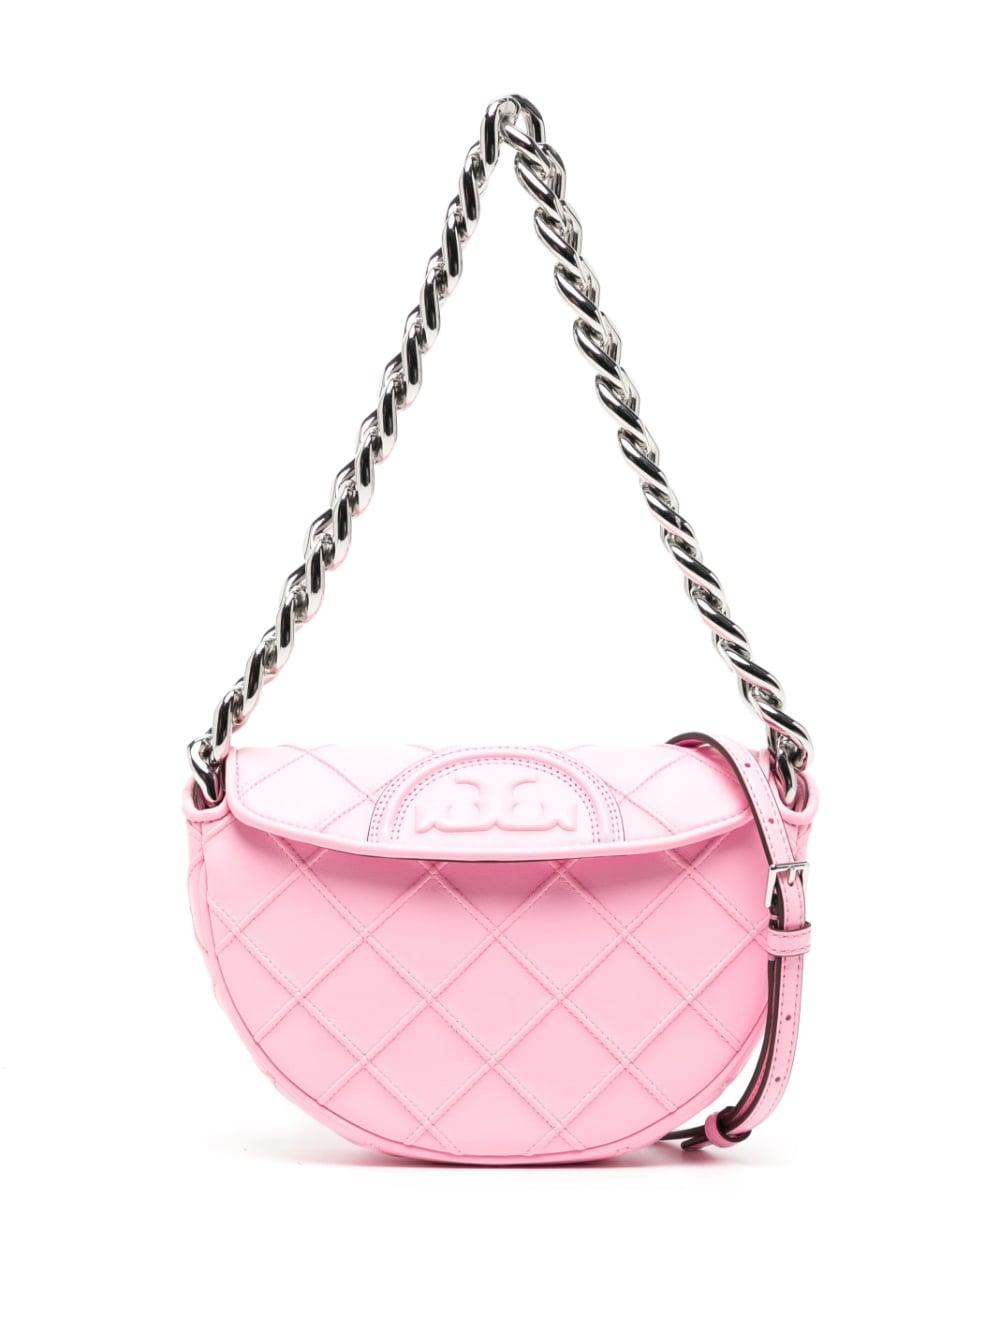 Tory Burch Fleming Crescent Leather Mini Bag in Pink